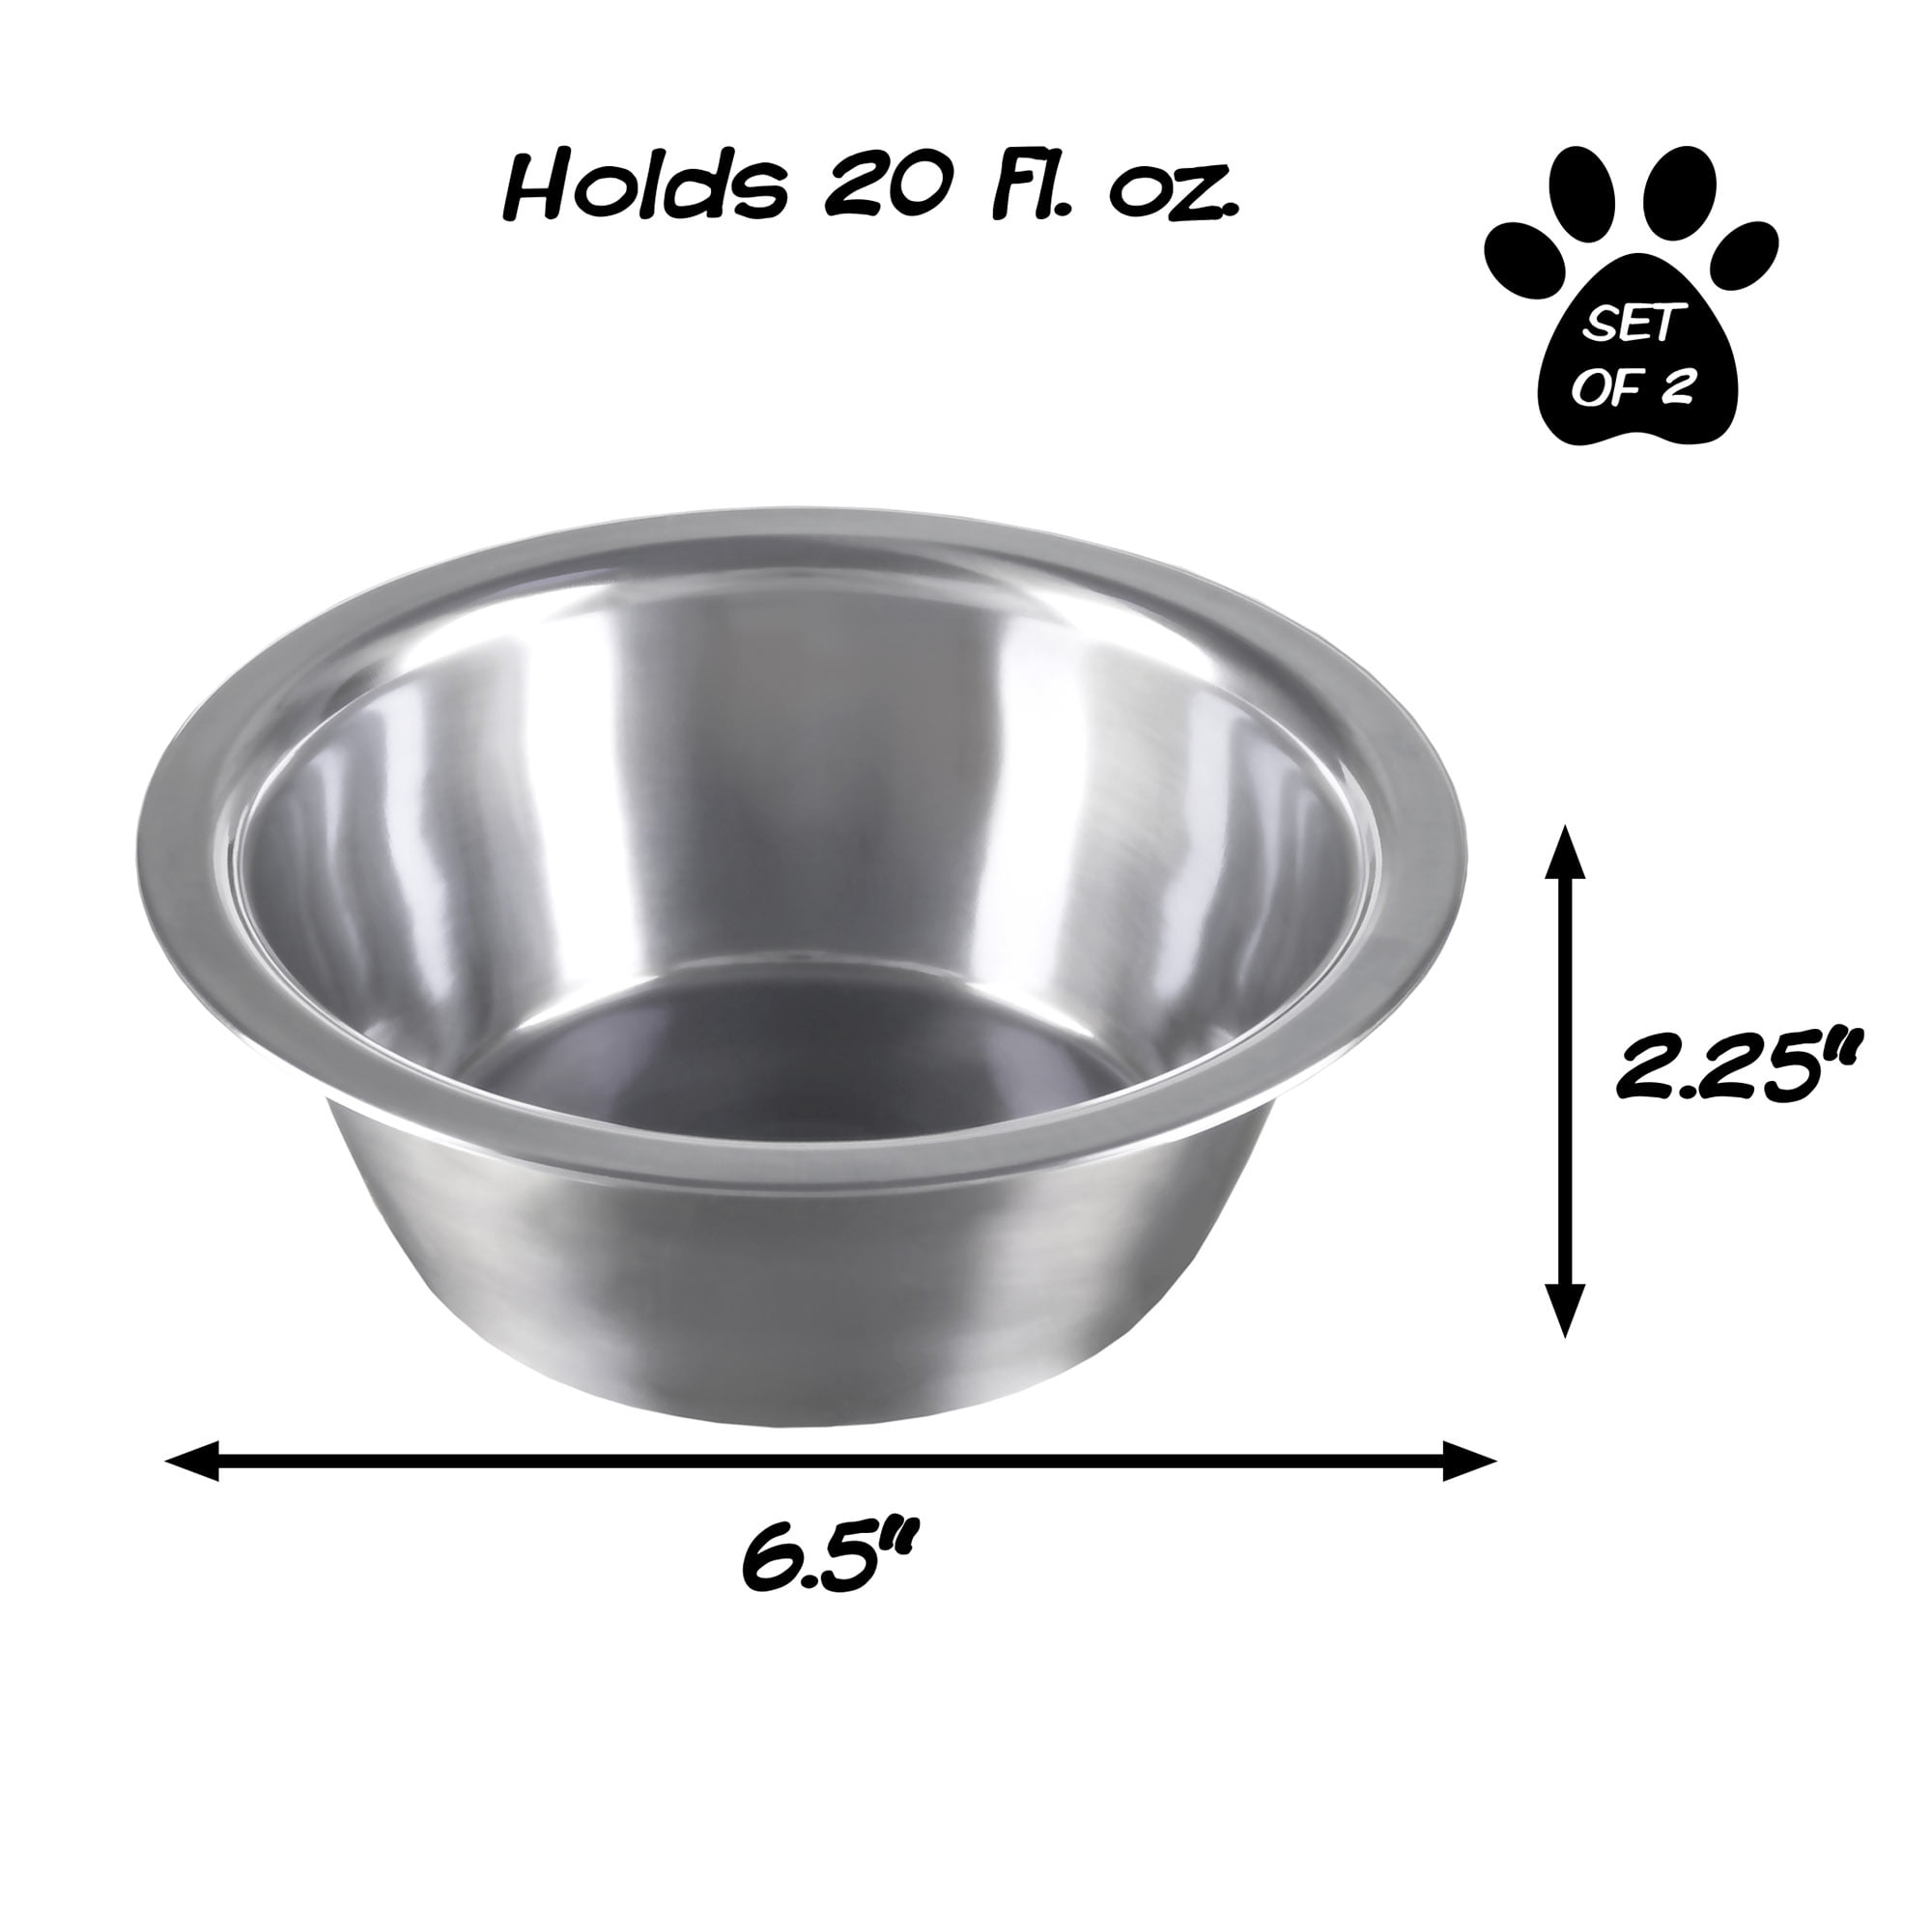 Stainless Steel Metal Dog Bowls (Pack of 2)